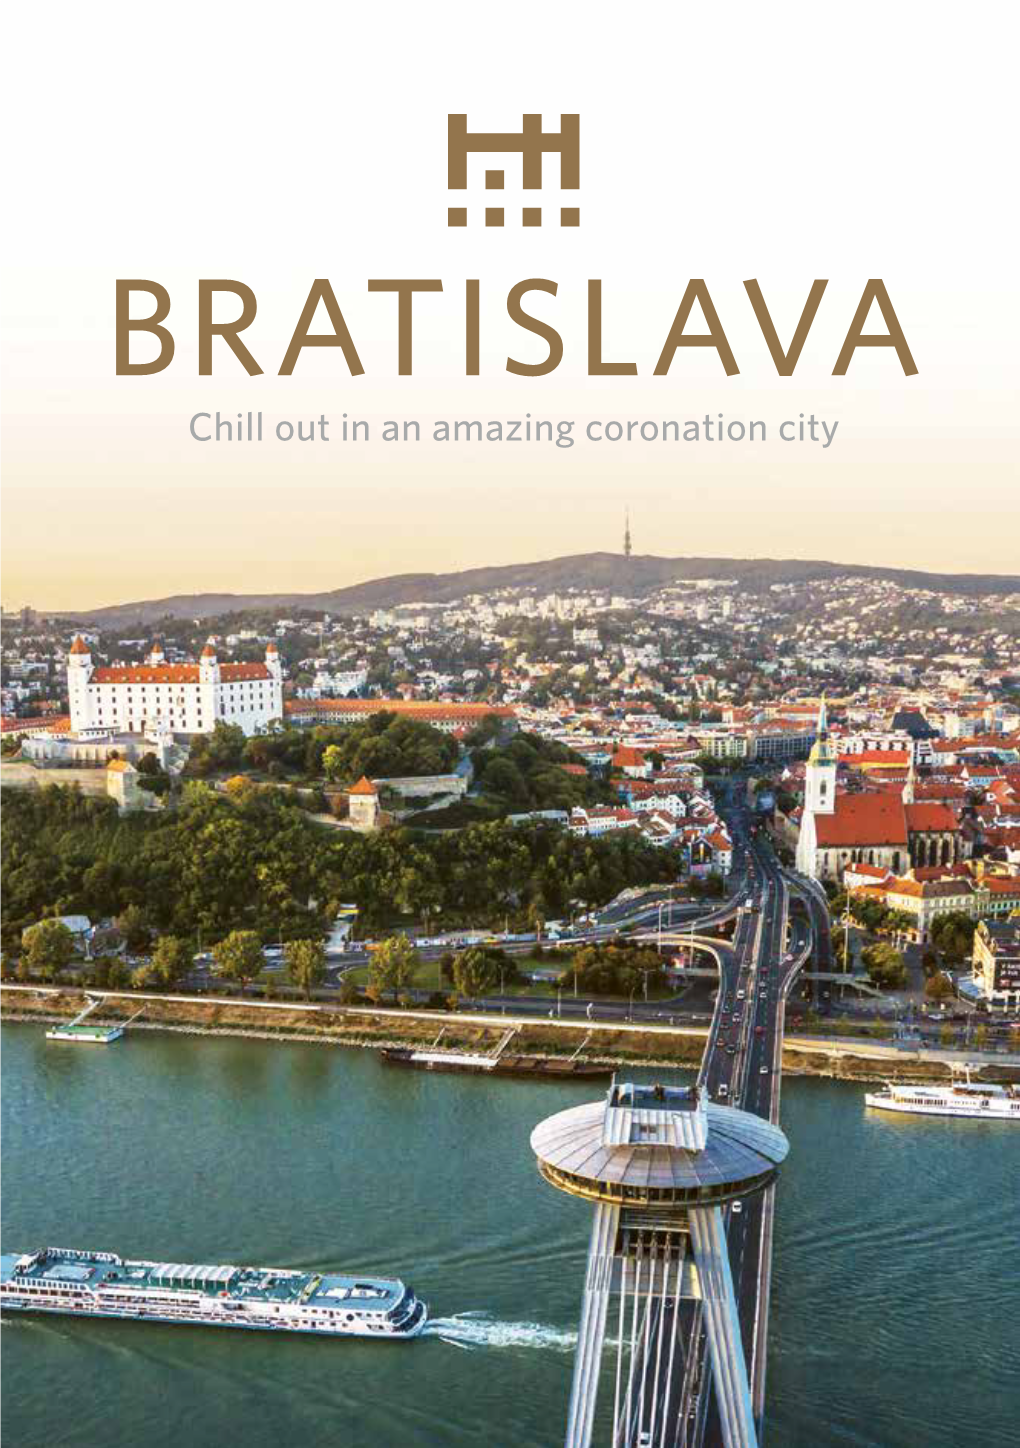 BRATISLAVA Chill out in an Amazing Coronation City Contents